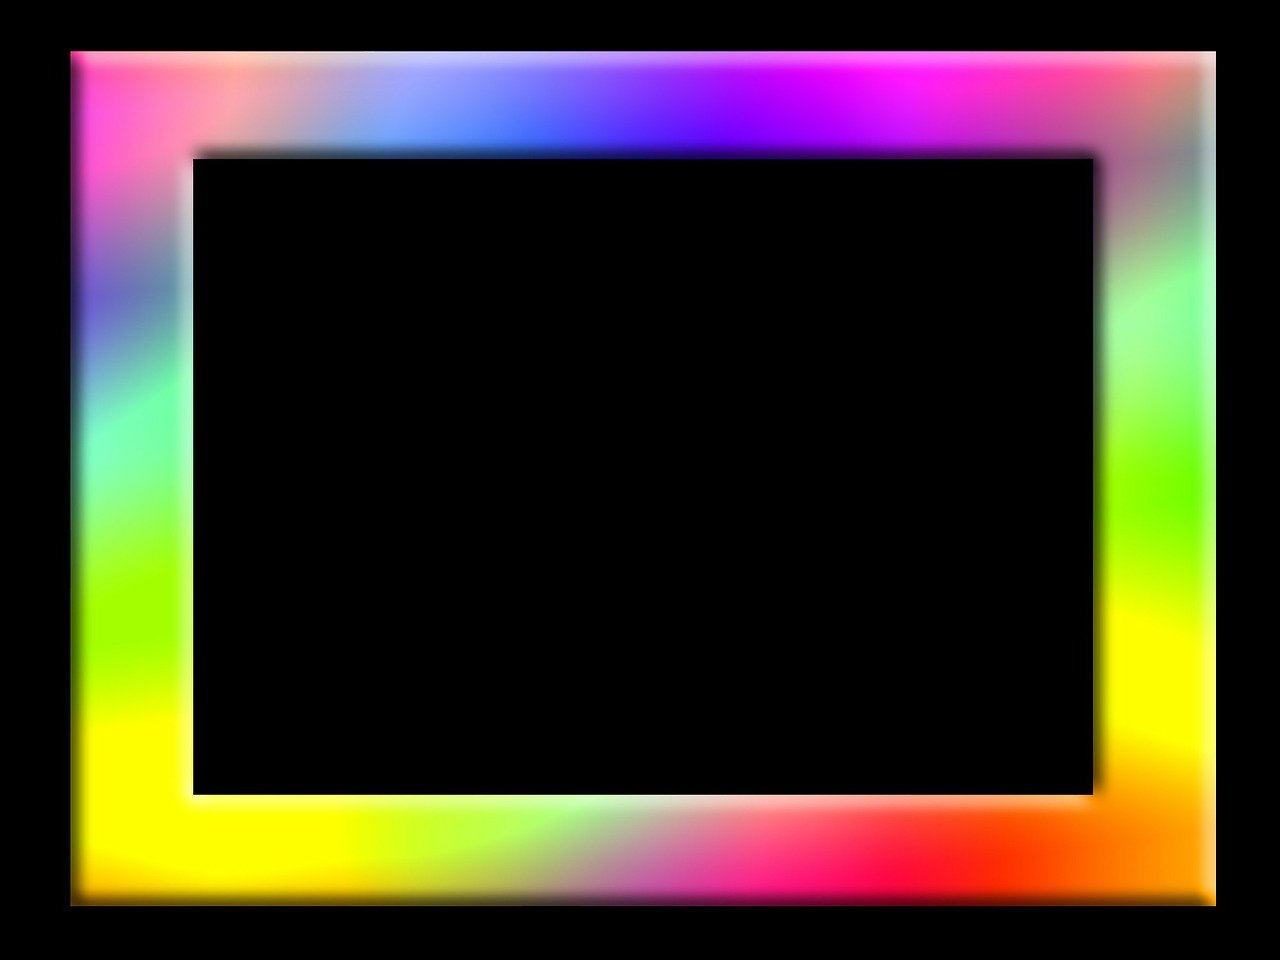 a rainbow colored frame on a black background, a pastel, flickr, color field, dithered gradients, large screen, black backround. inkscape, meme template